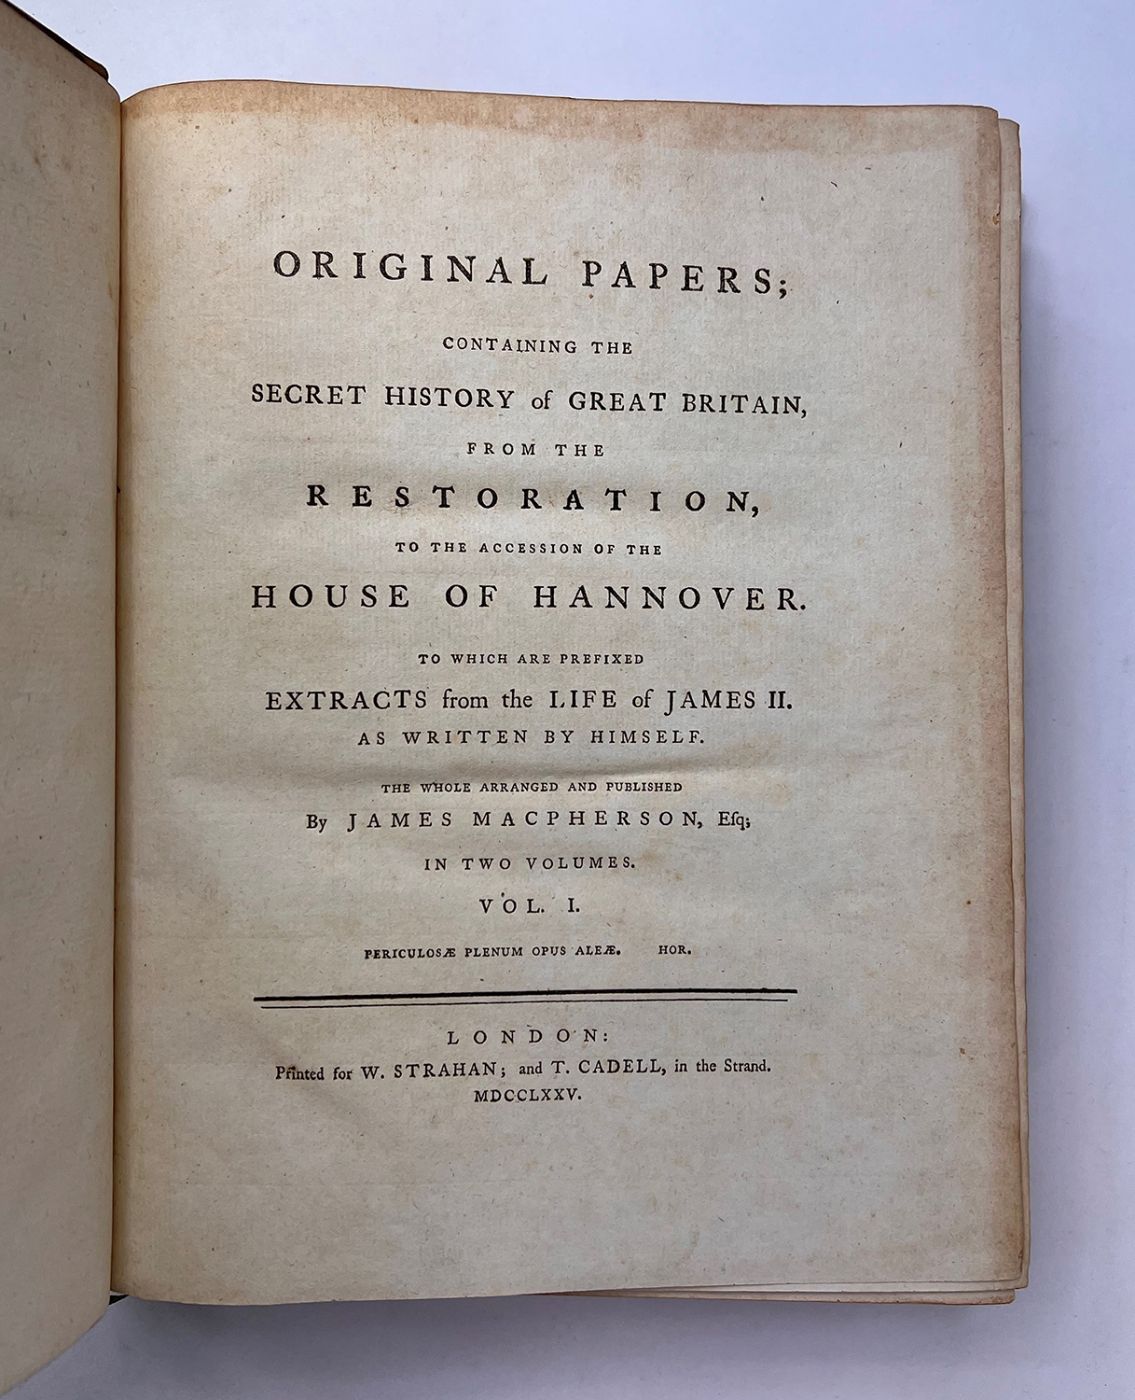 ORIGINAL PAPERS; CONTAINING THE SECRET HISTORY OF GREAT BRITAIN, FROM THE RESTORATION, TO THE ACCESSION OF THE HOUSE OF HANNOVER. -  image 4